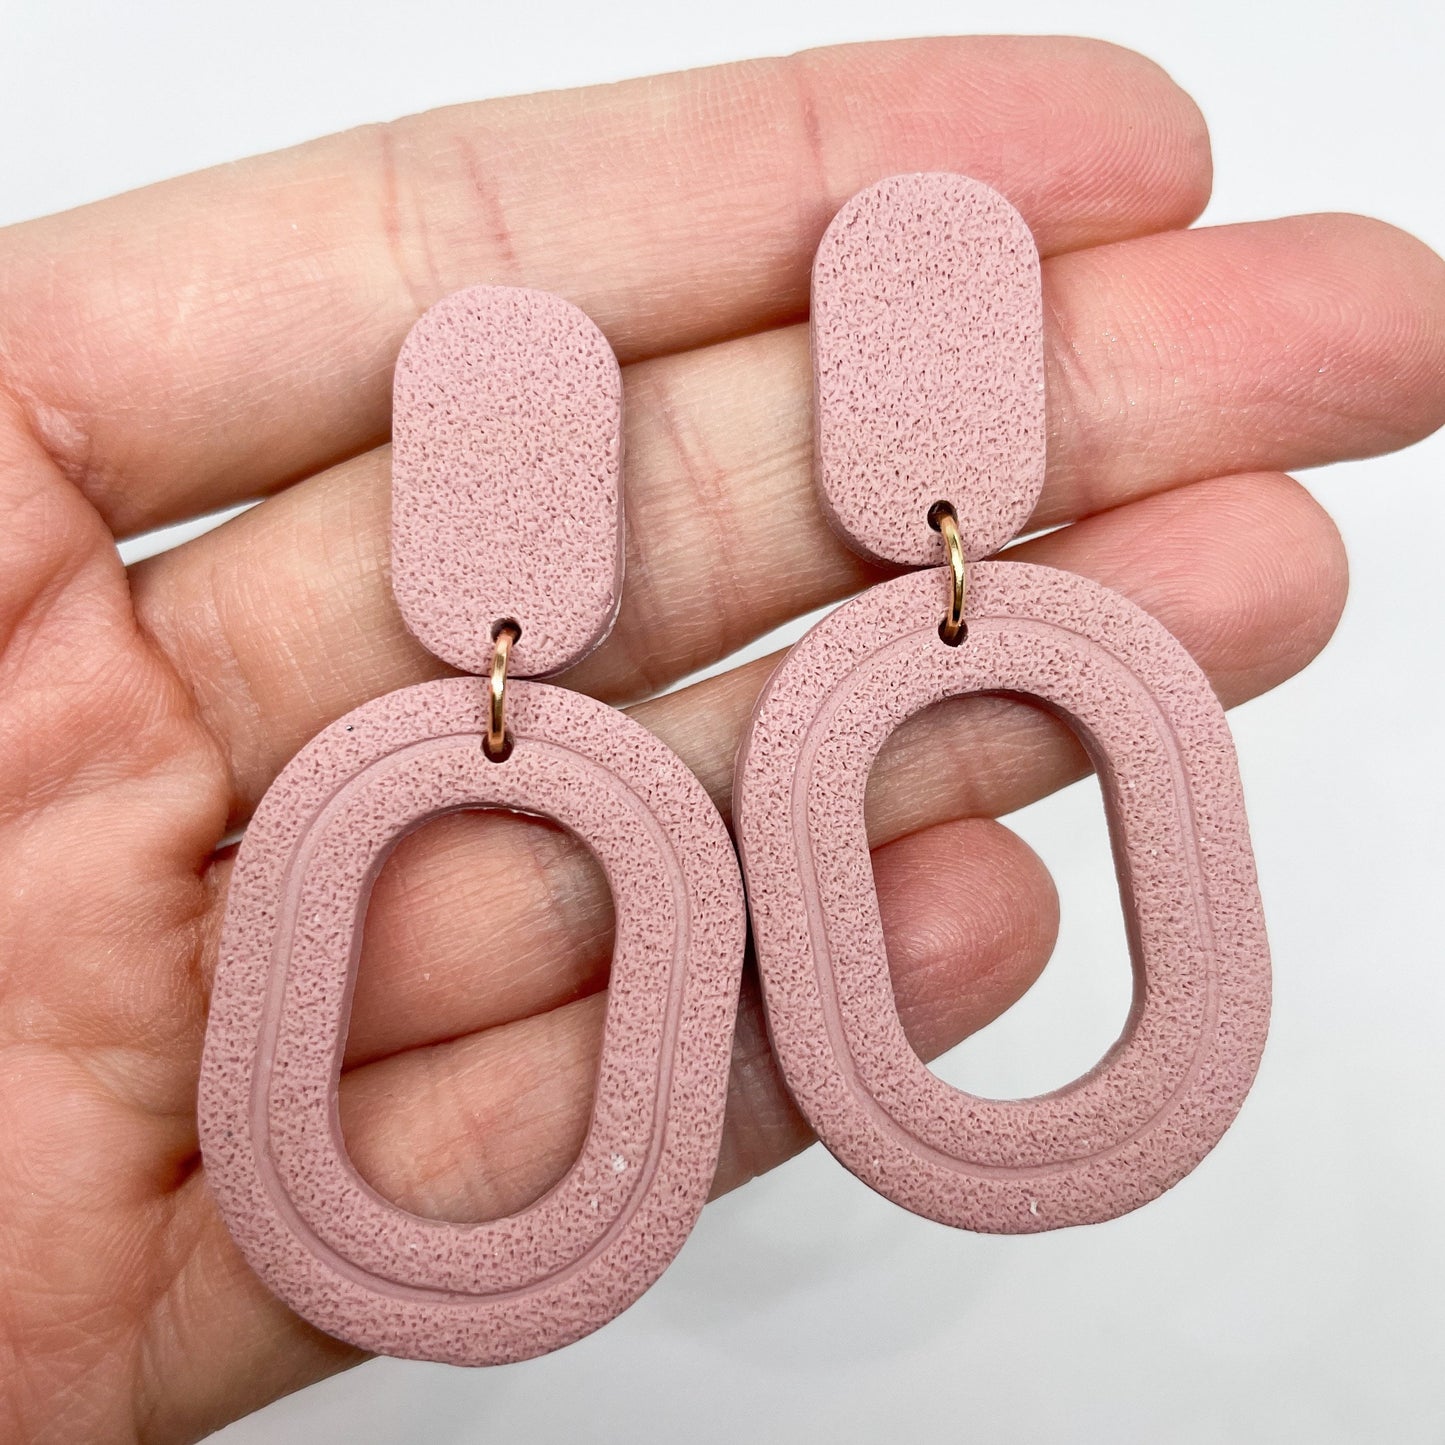 Polymer clay earrings pink, textured clay earrings, galentine gift, post box gift, best friend birthday gift, valentines girlfriend gift,